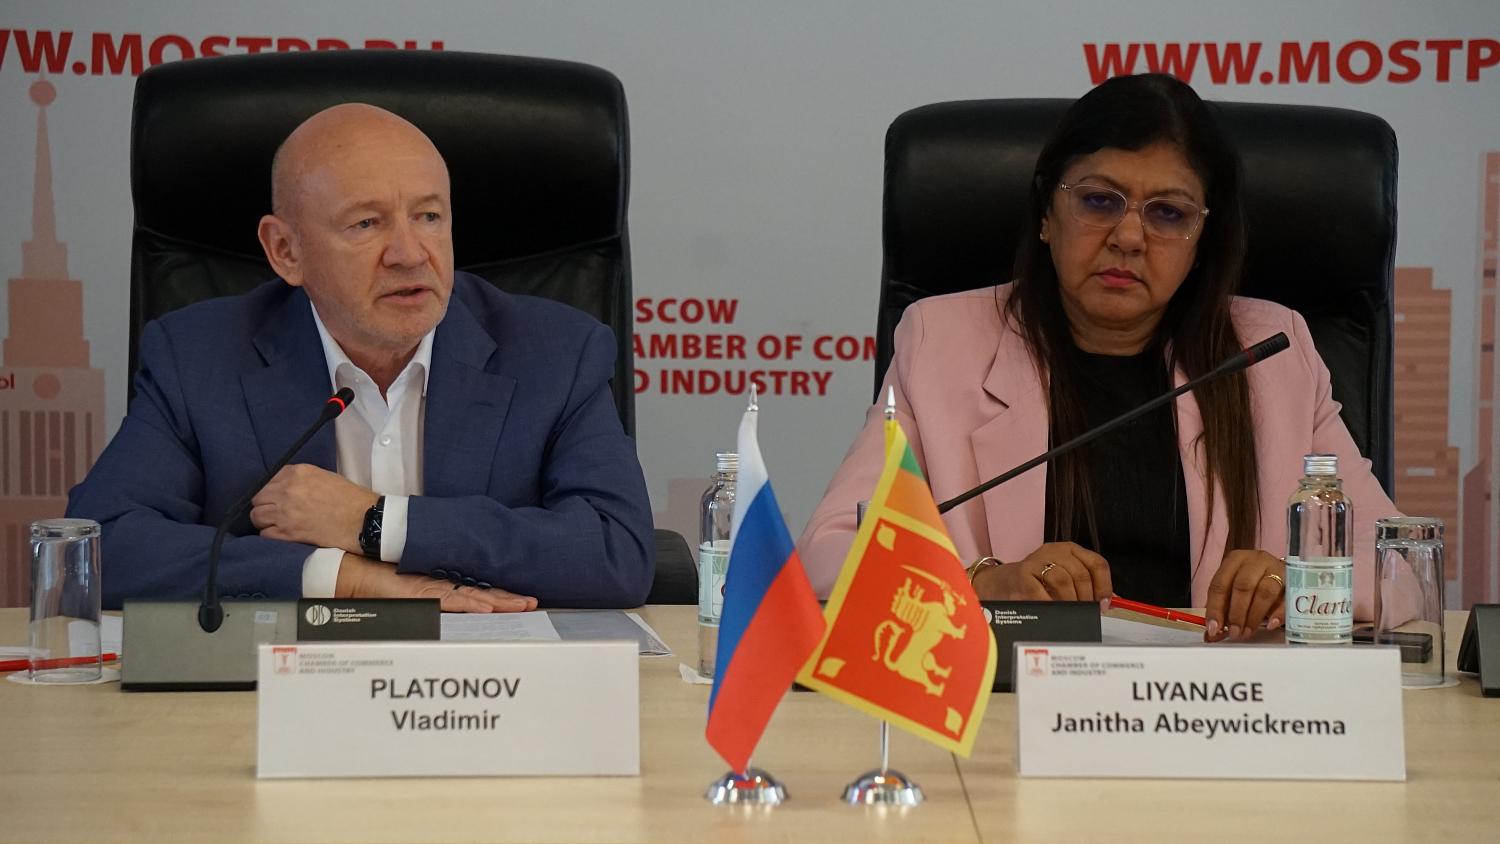 Moscows and Sri Lankan entrepreneurs expressed mutual interest in cooperation